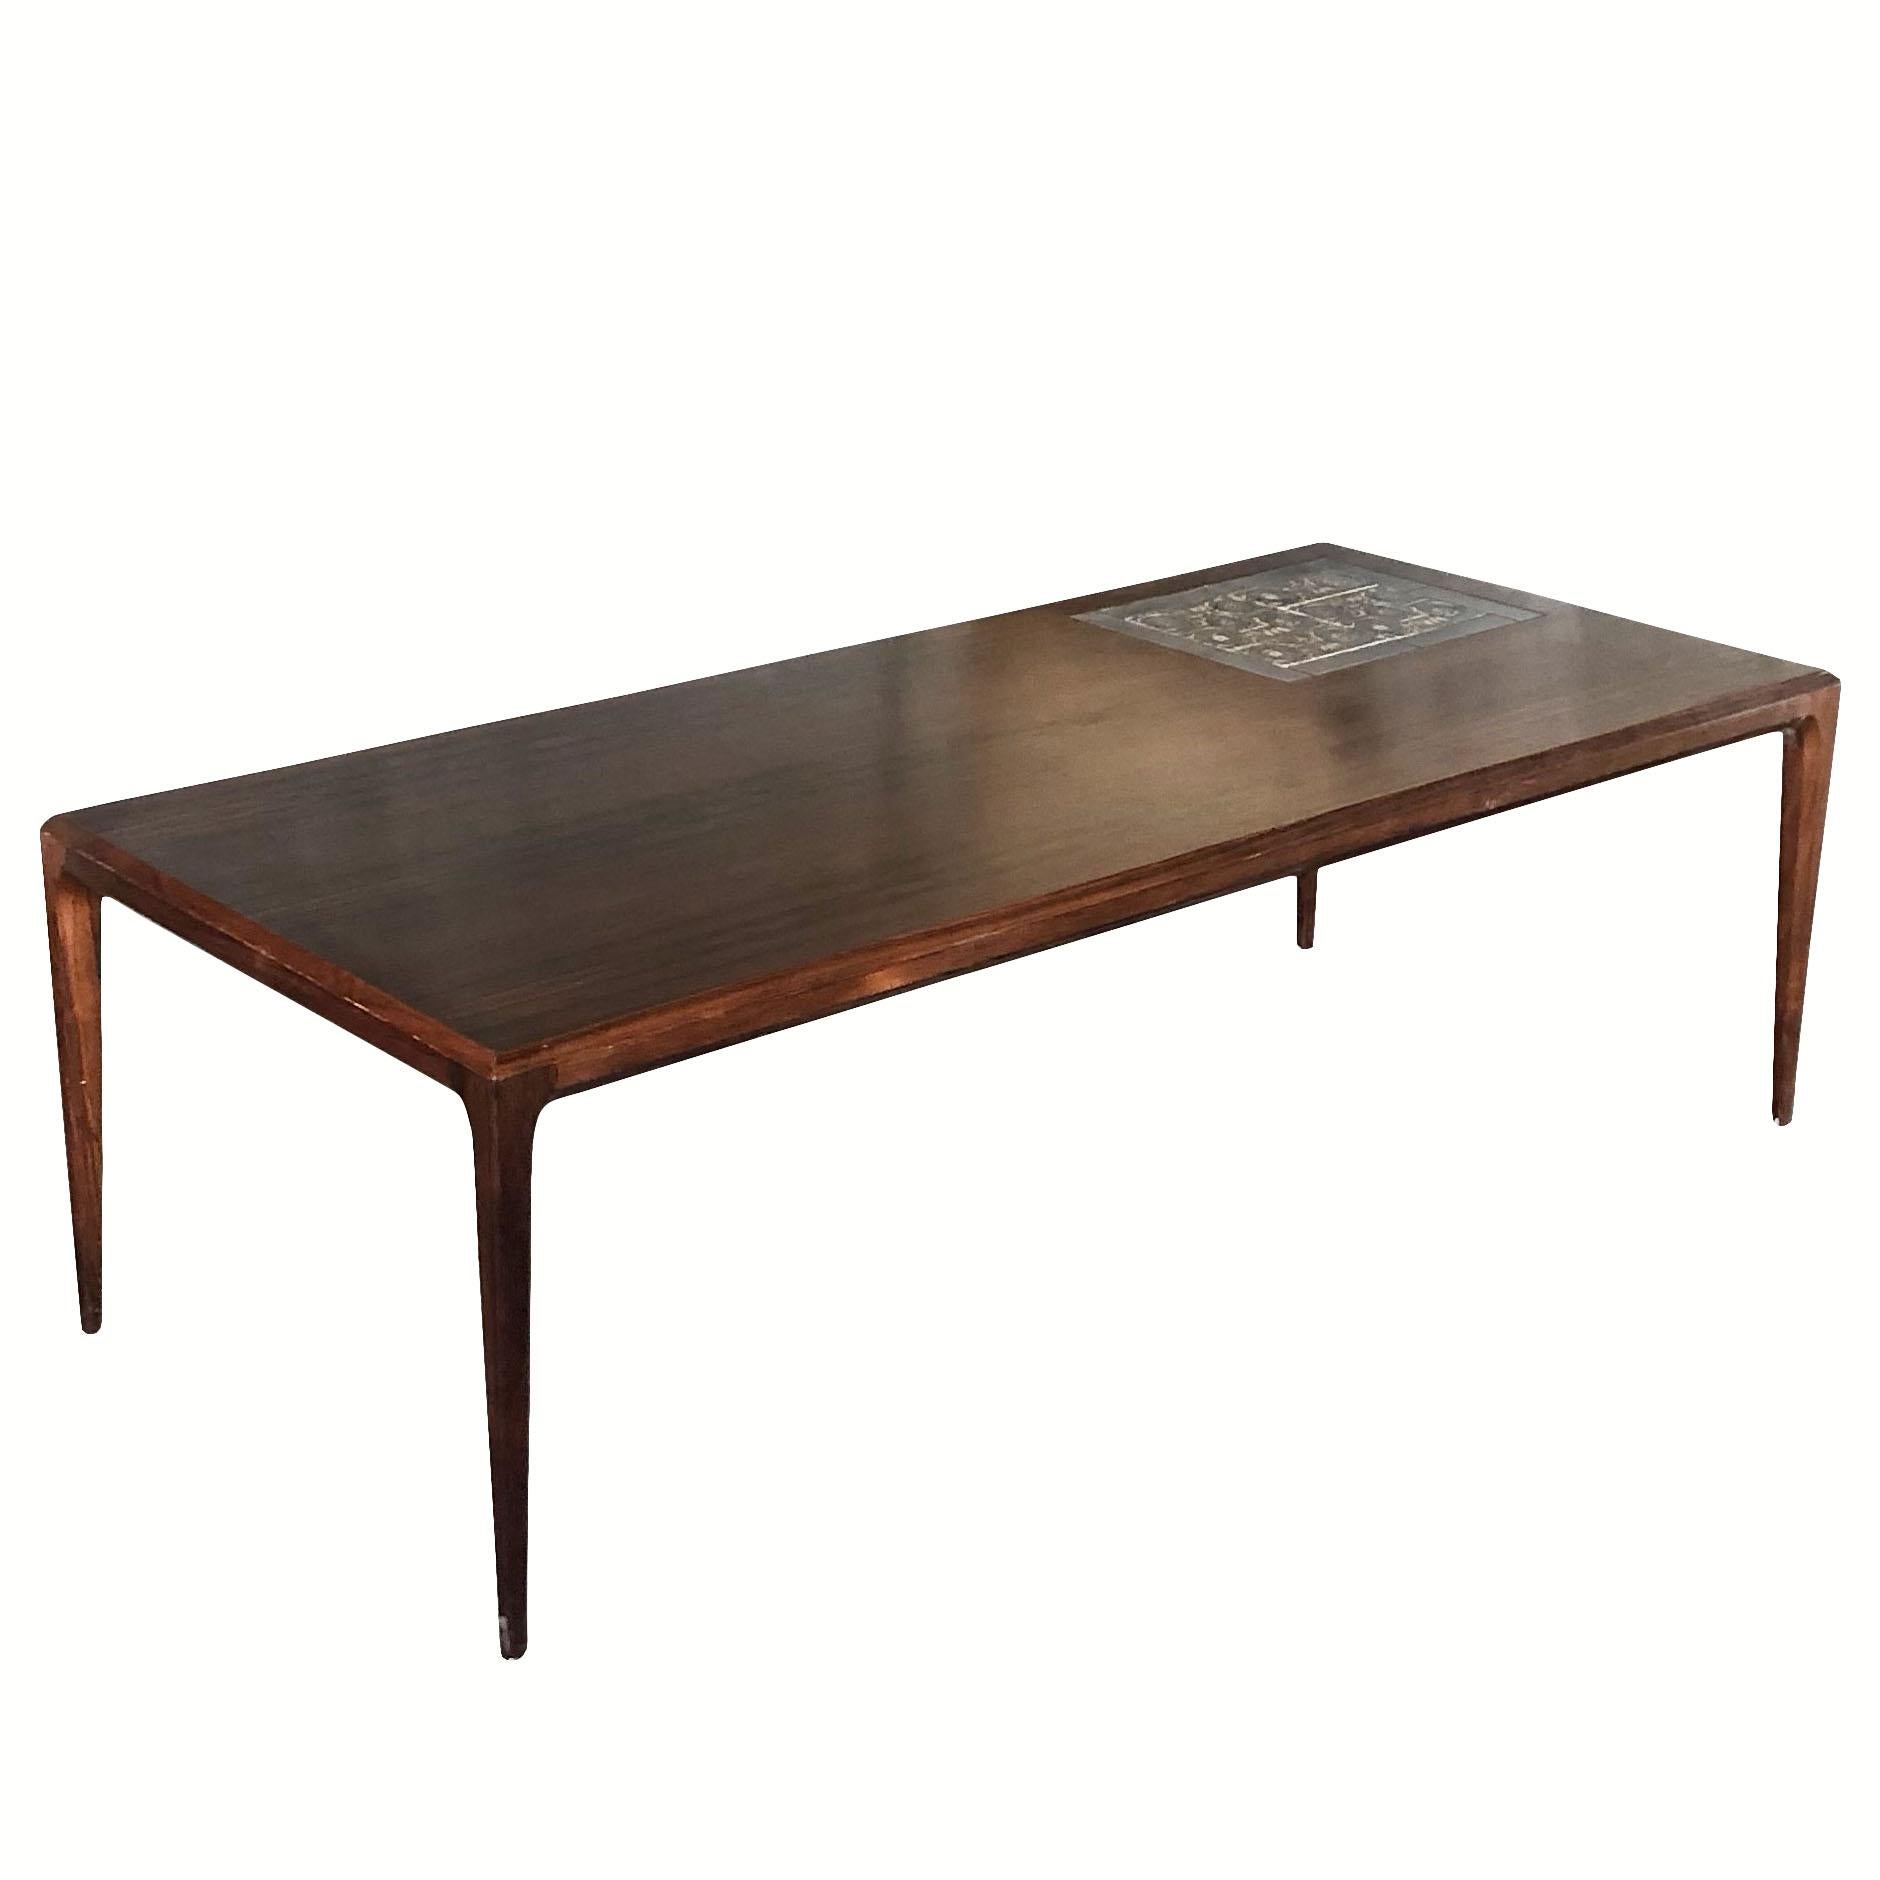 20th Century, Danish Rosewood Coffee Table by Severin Hansen & Nils Thorsson In Good Condition For Sale In West Palm Beach, FL